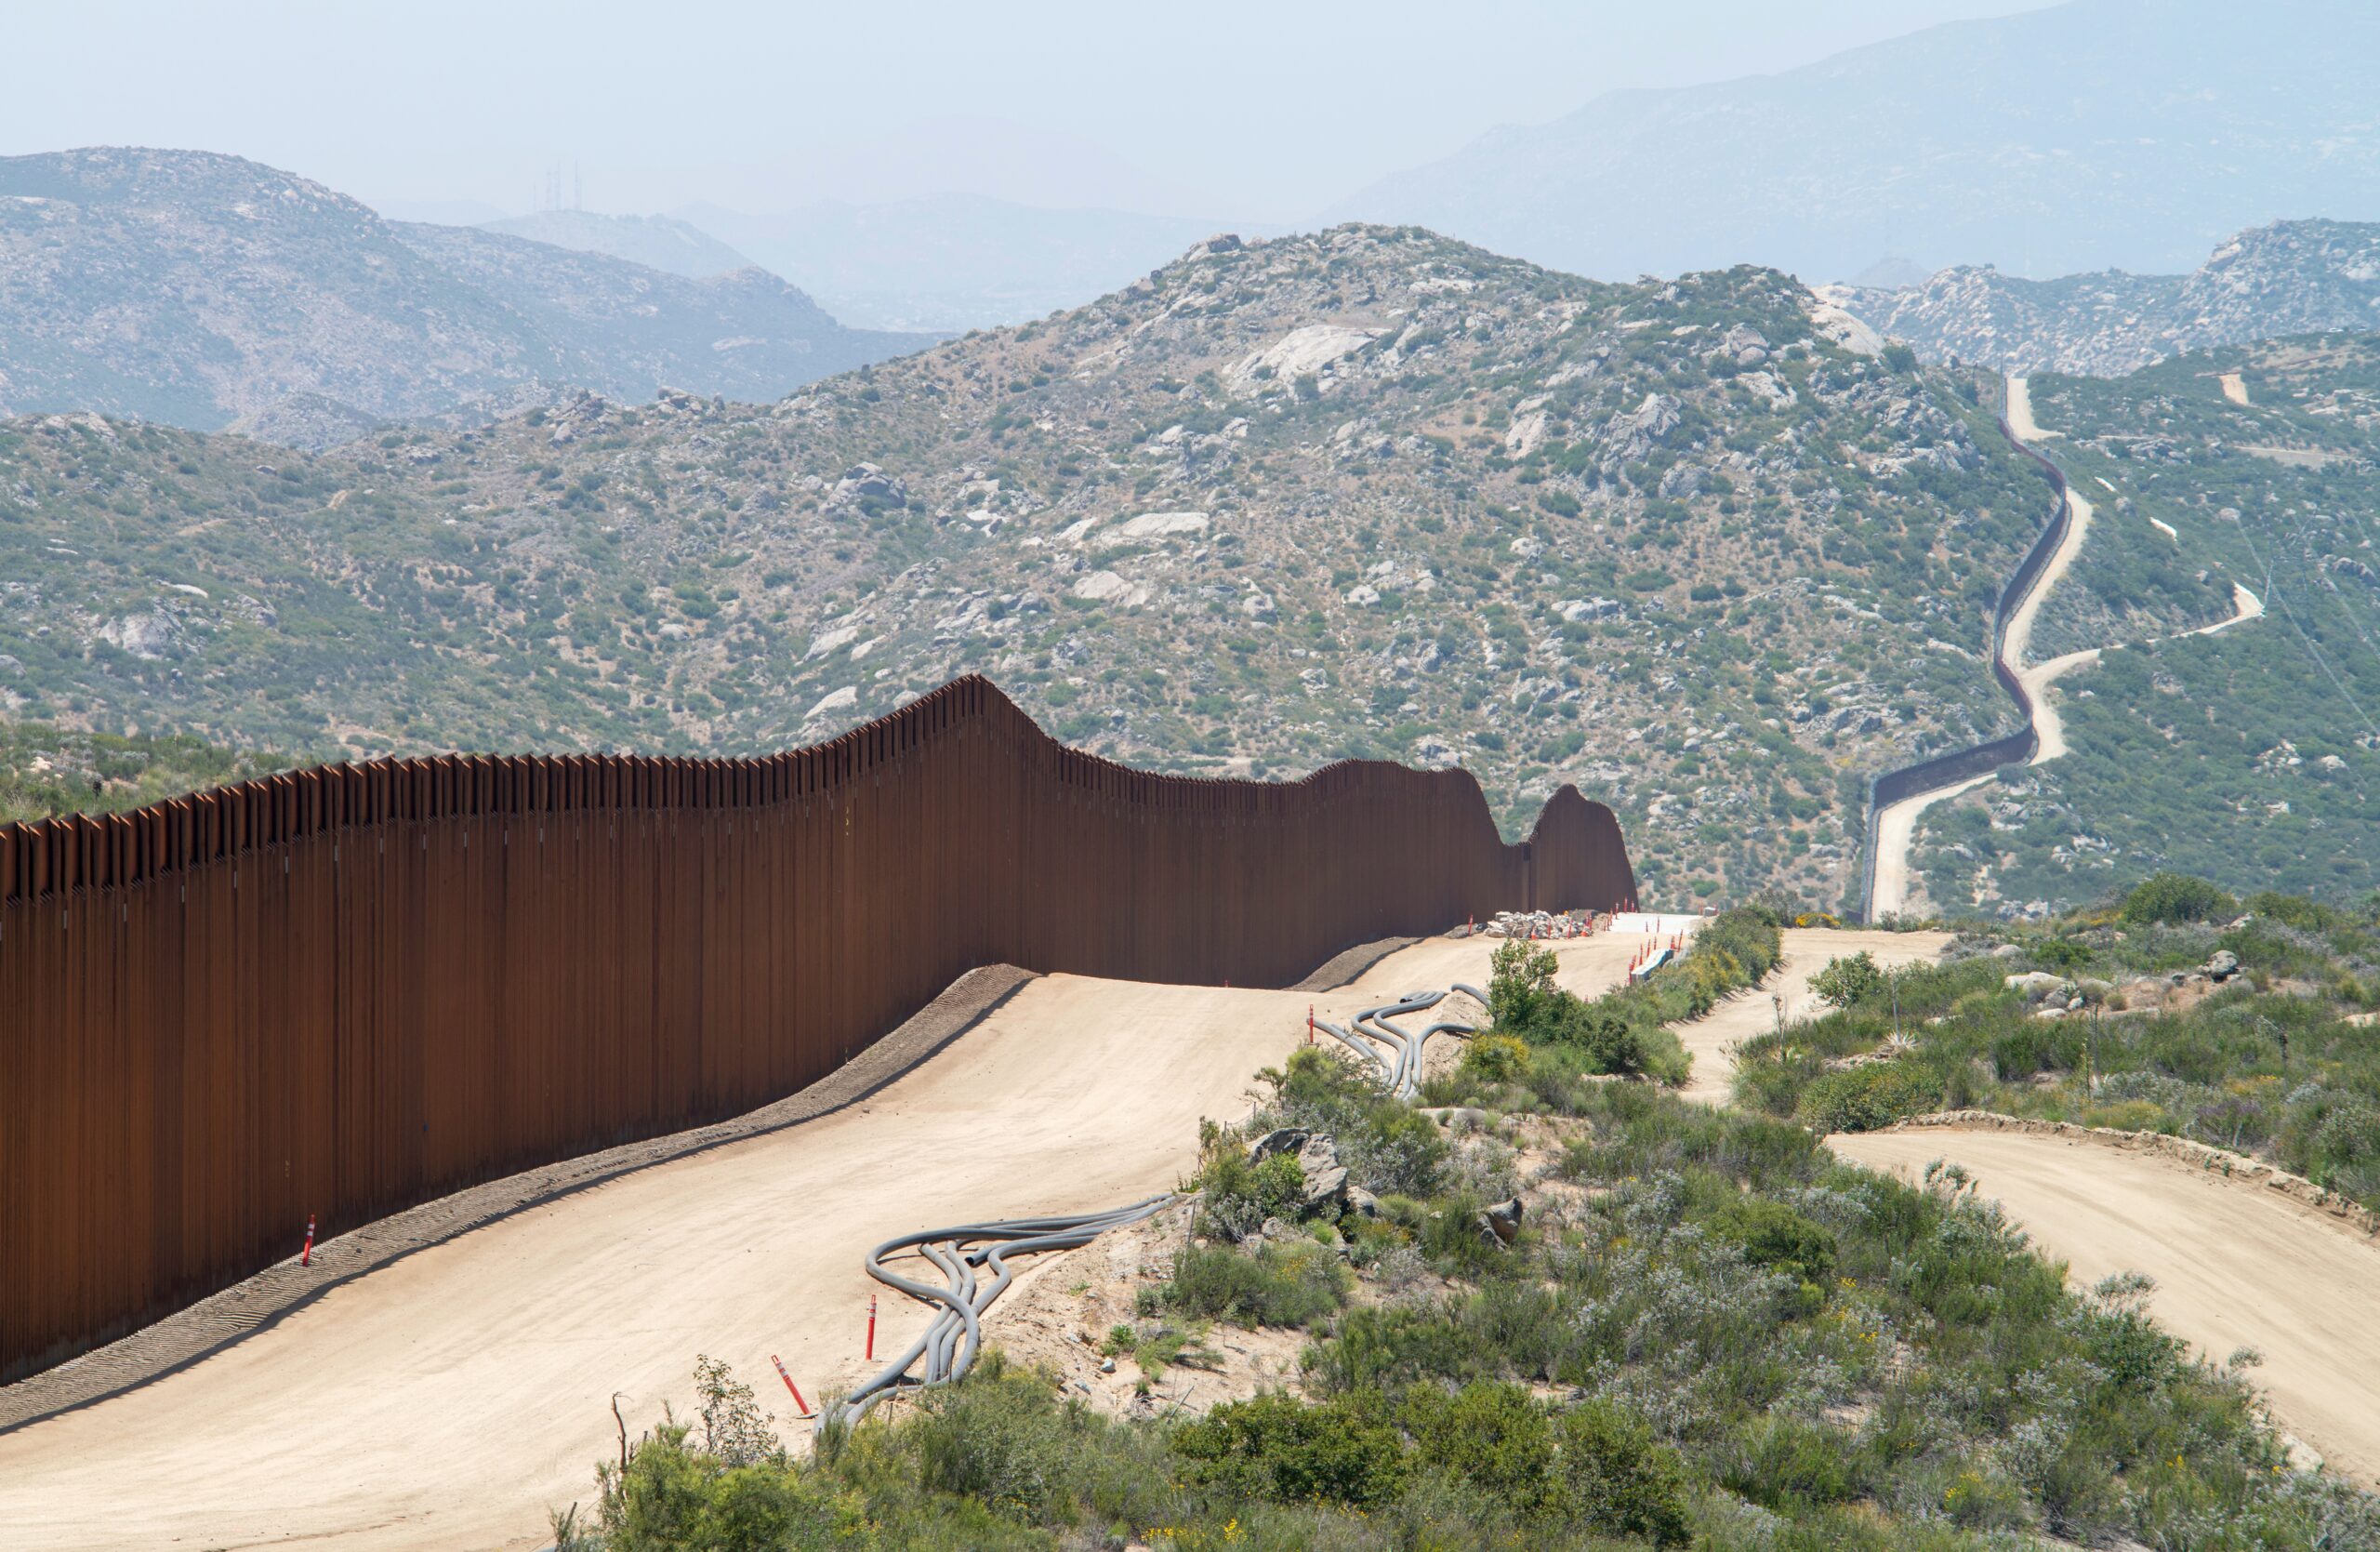 Should the U.S. build a wall along the southern border?